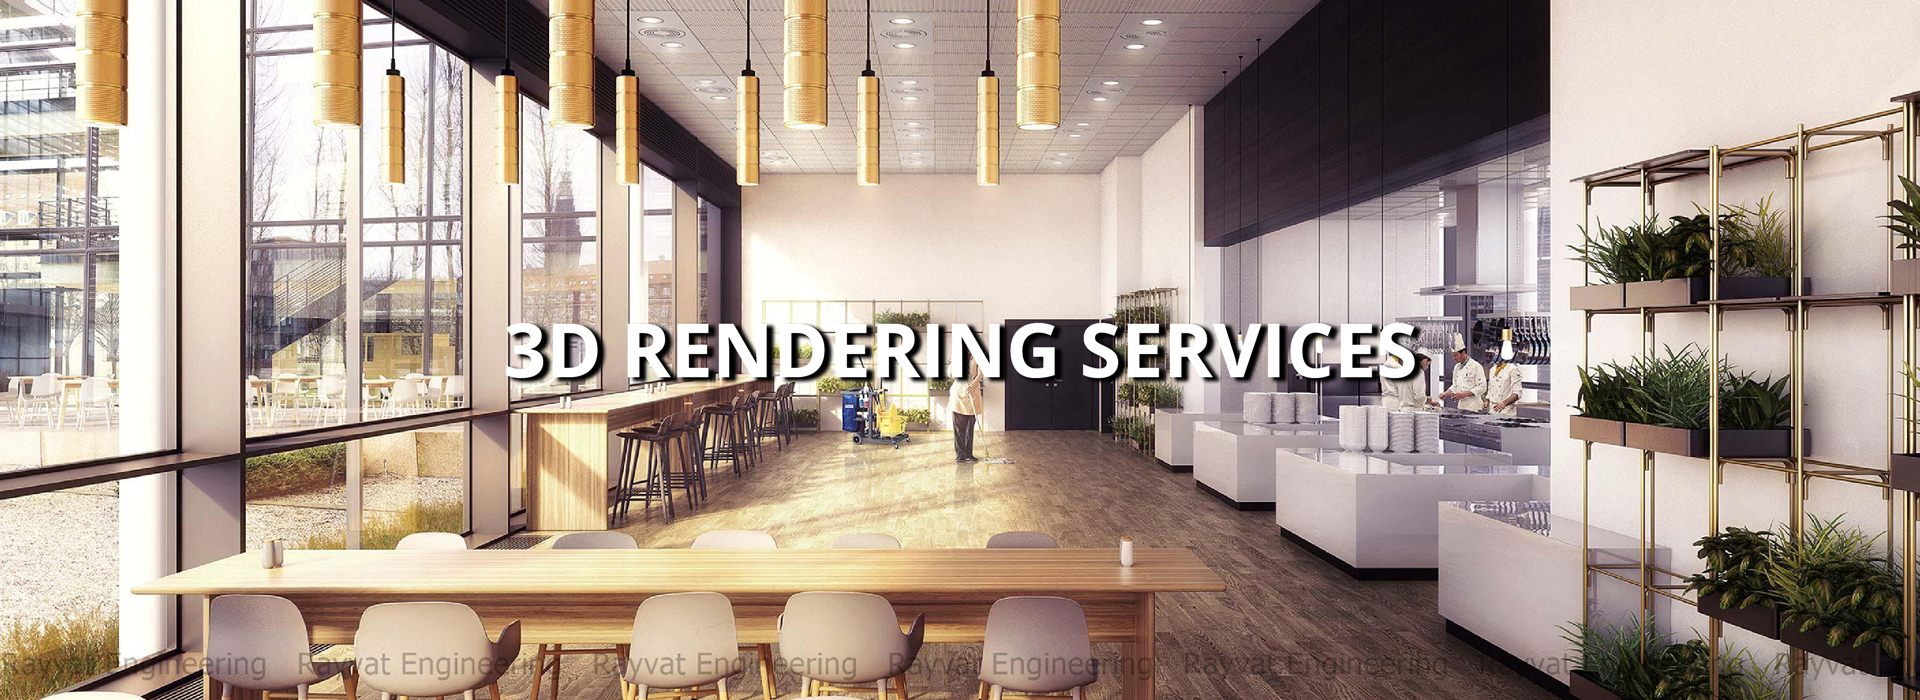 3d Rendering Services - 3d Animation - Render Company - Miami, Fl